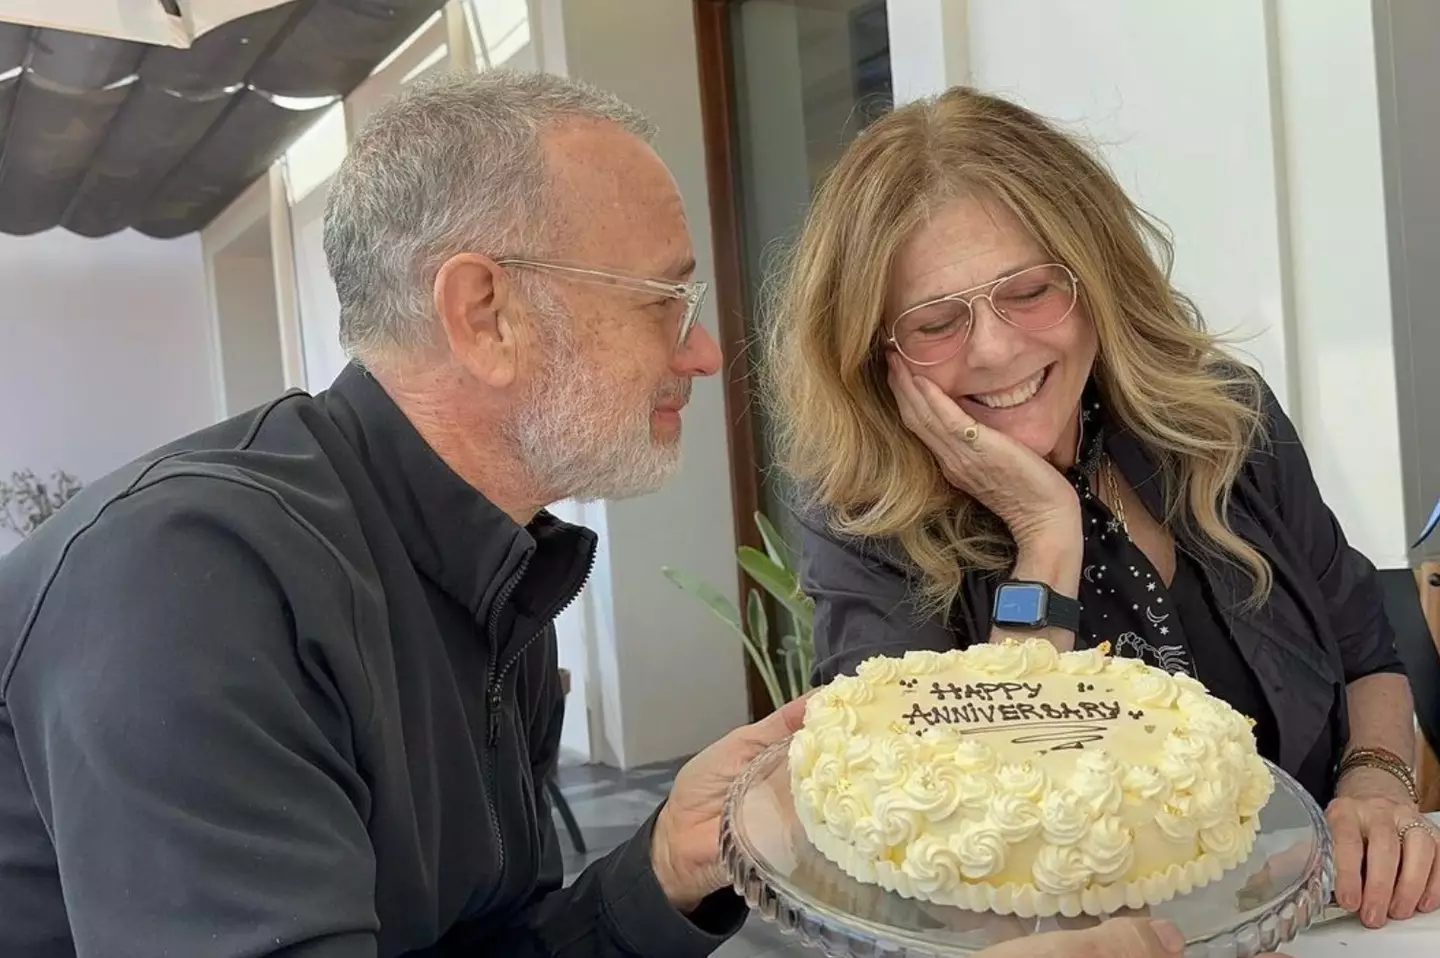 Tom Hanks and Rita Wilson celebrated 35 years together.